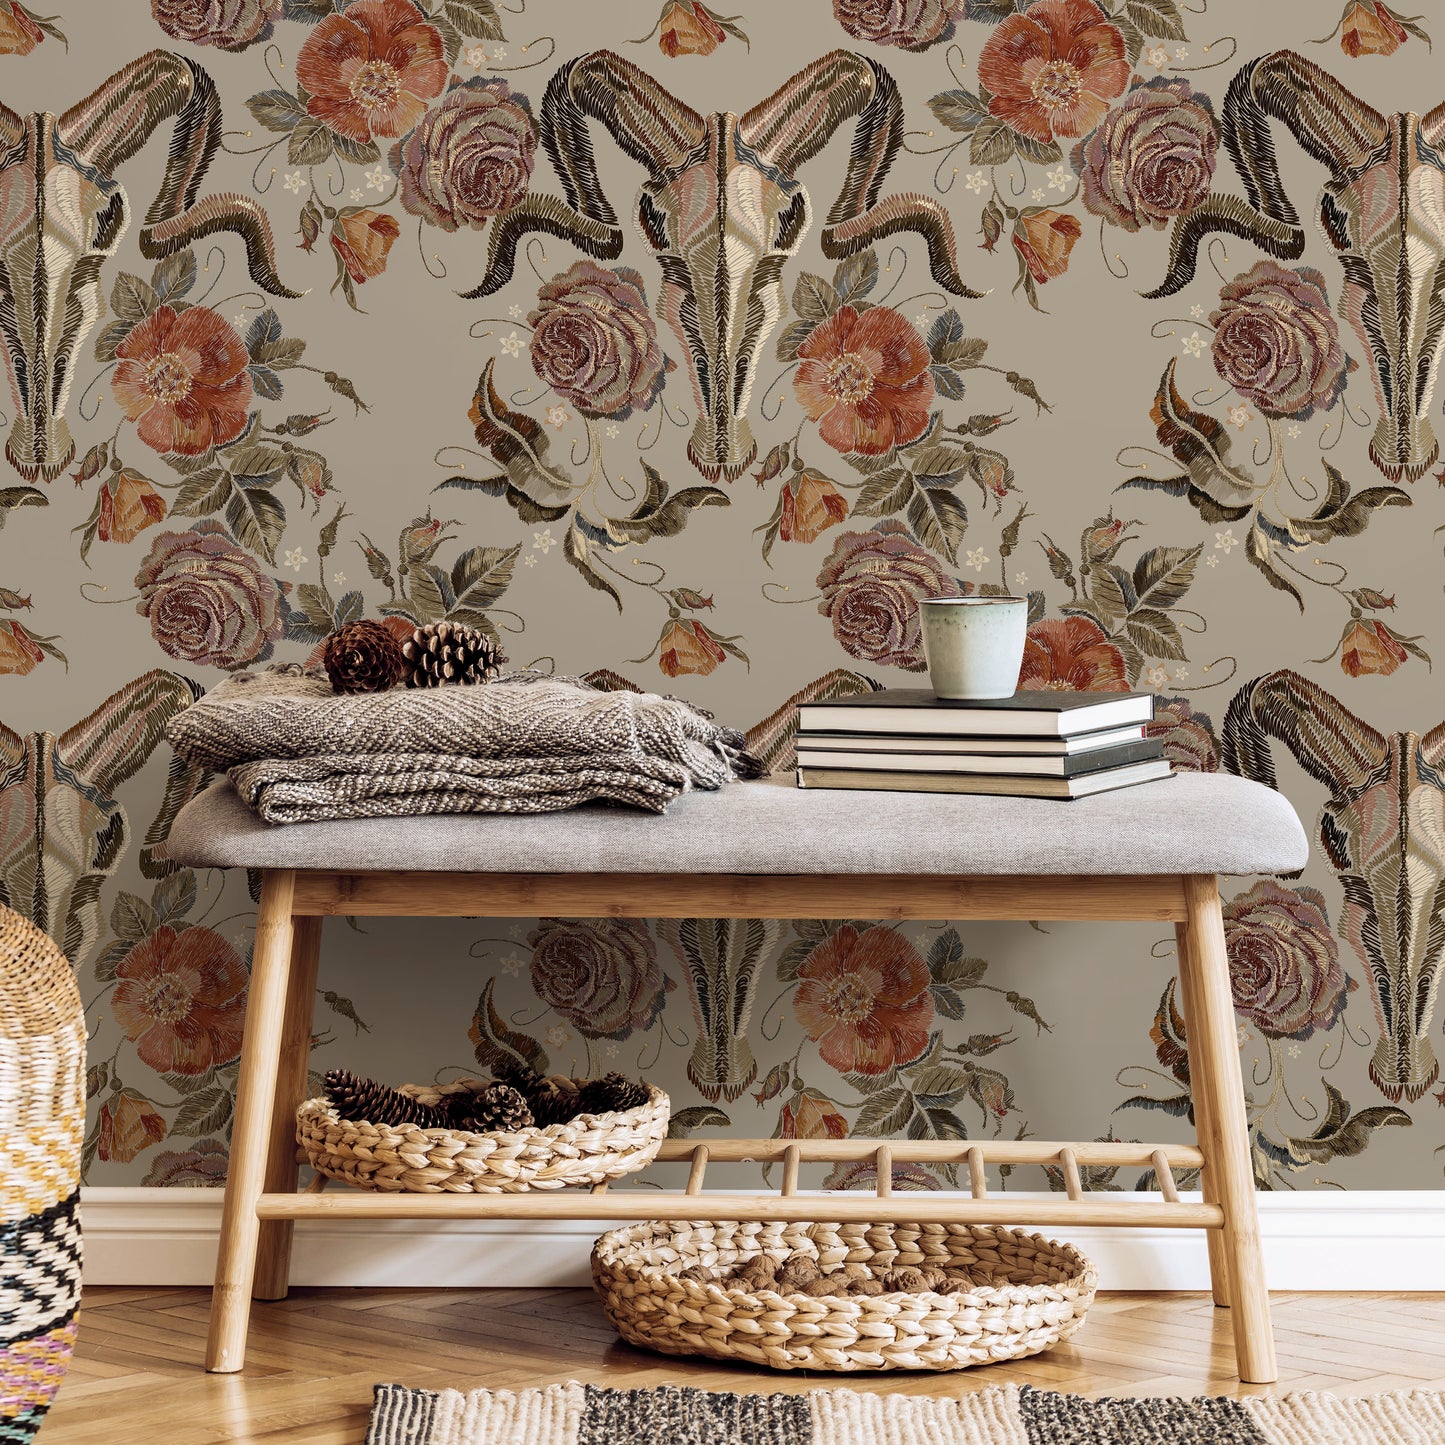 Goat Skull Wallpaper Vintage Floral Wallpaper Peel and Stick and Traditional Wallpaper - D887